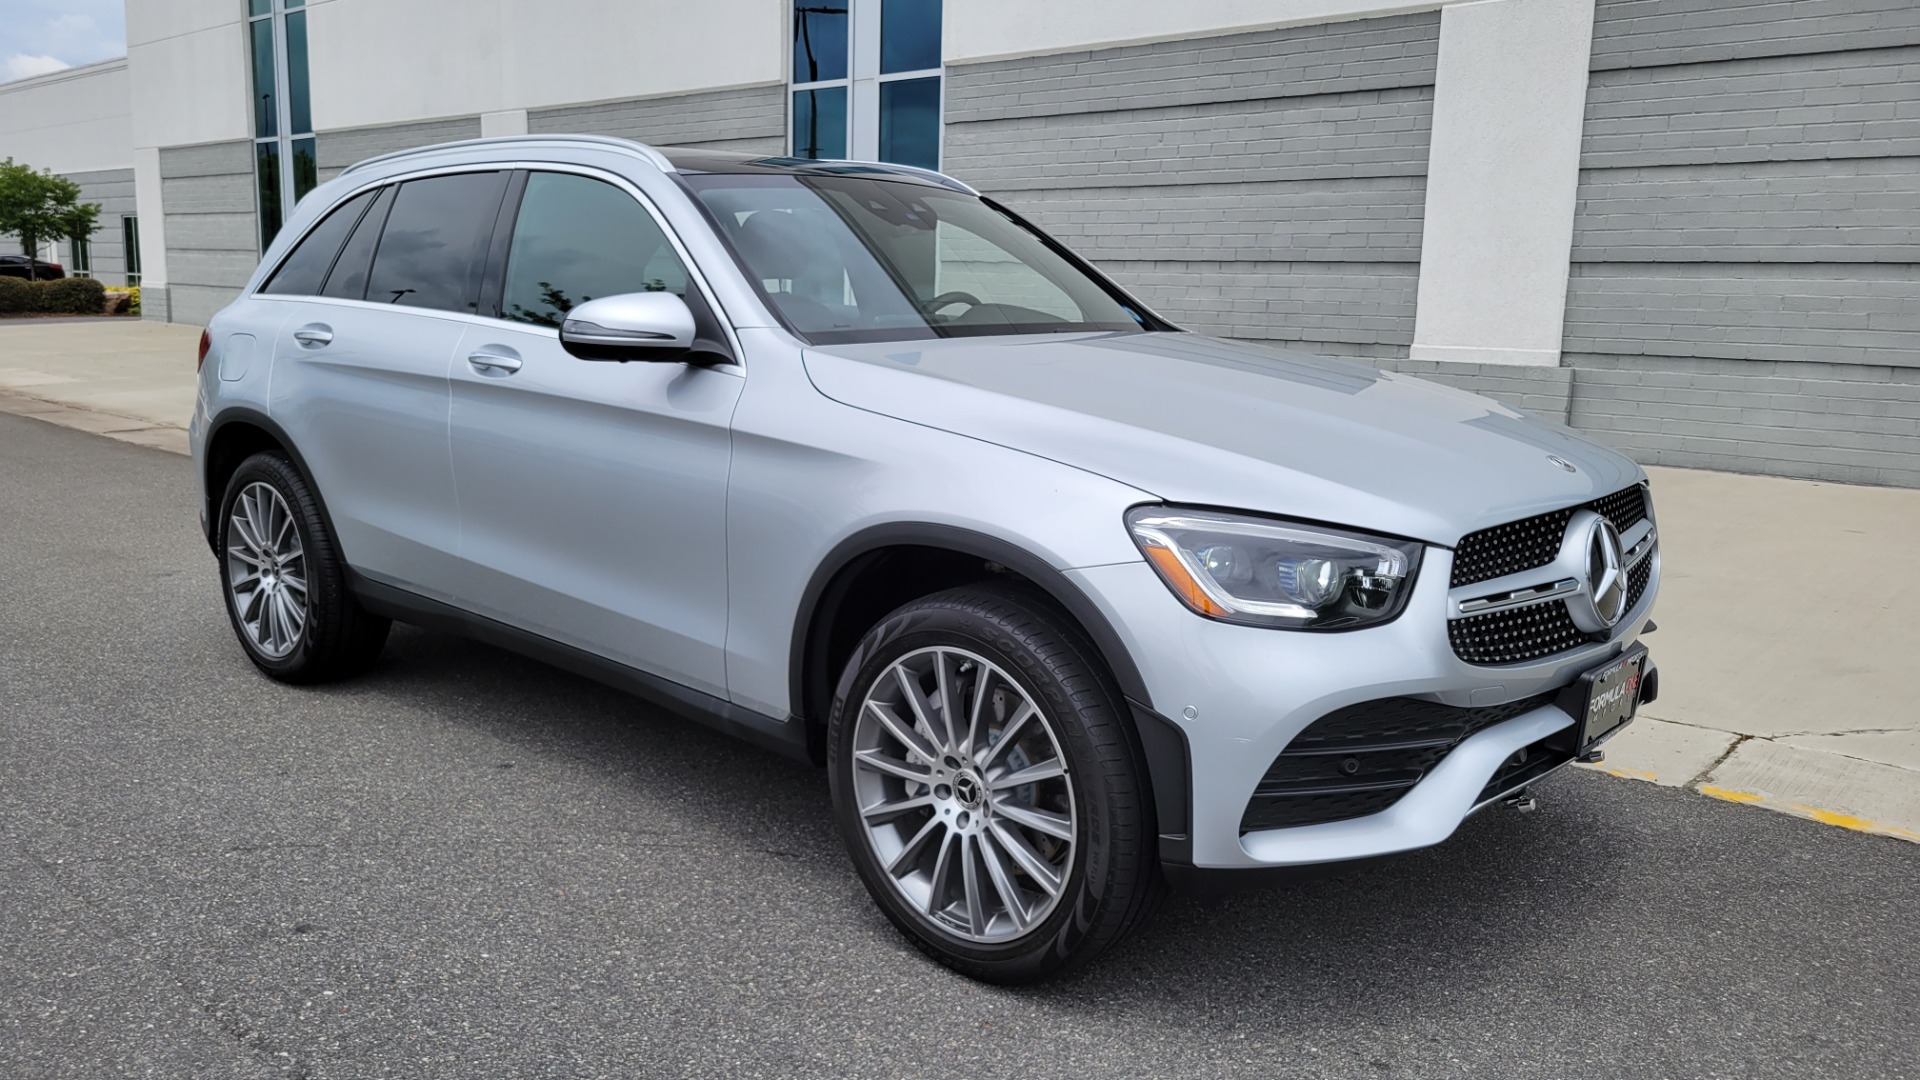 Used 2020 Mercedes-Benz GLC 300 PREMIUM / MULTIMEDIA / PARK ASST / LIGHTING / PANO-ROOF / CAMERA for sale $48,999 at Formula Imports in Charlotte NC 28227 10